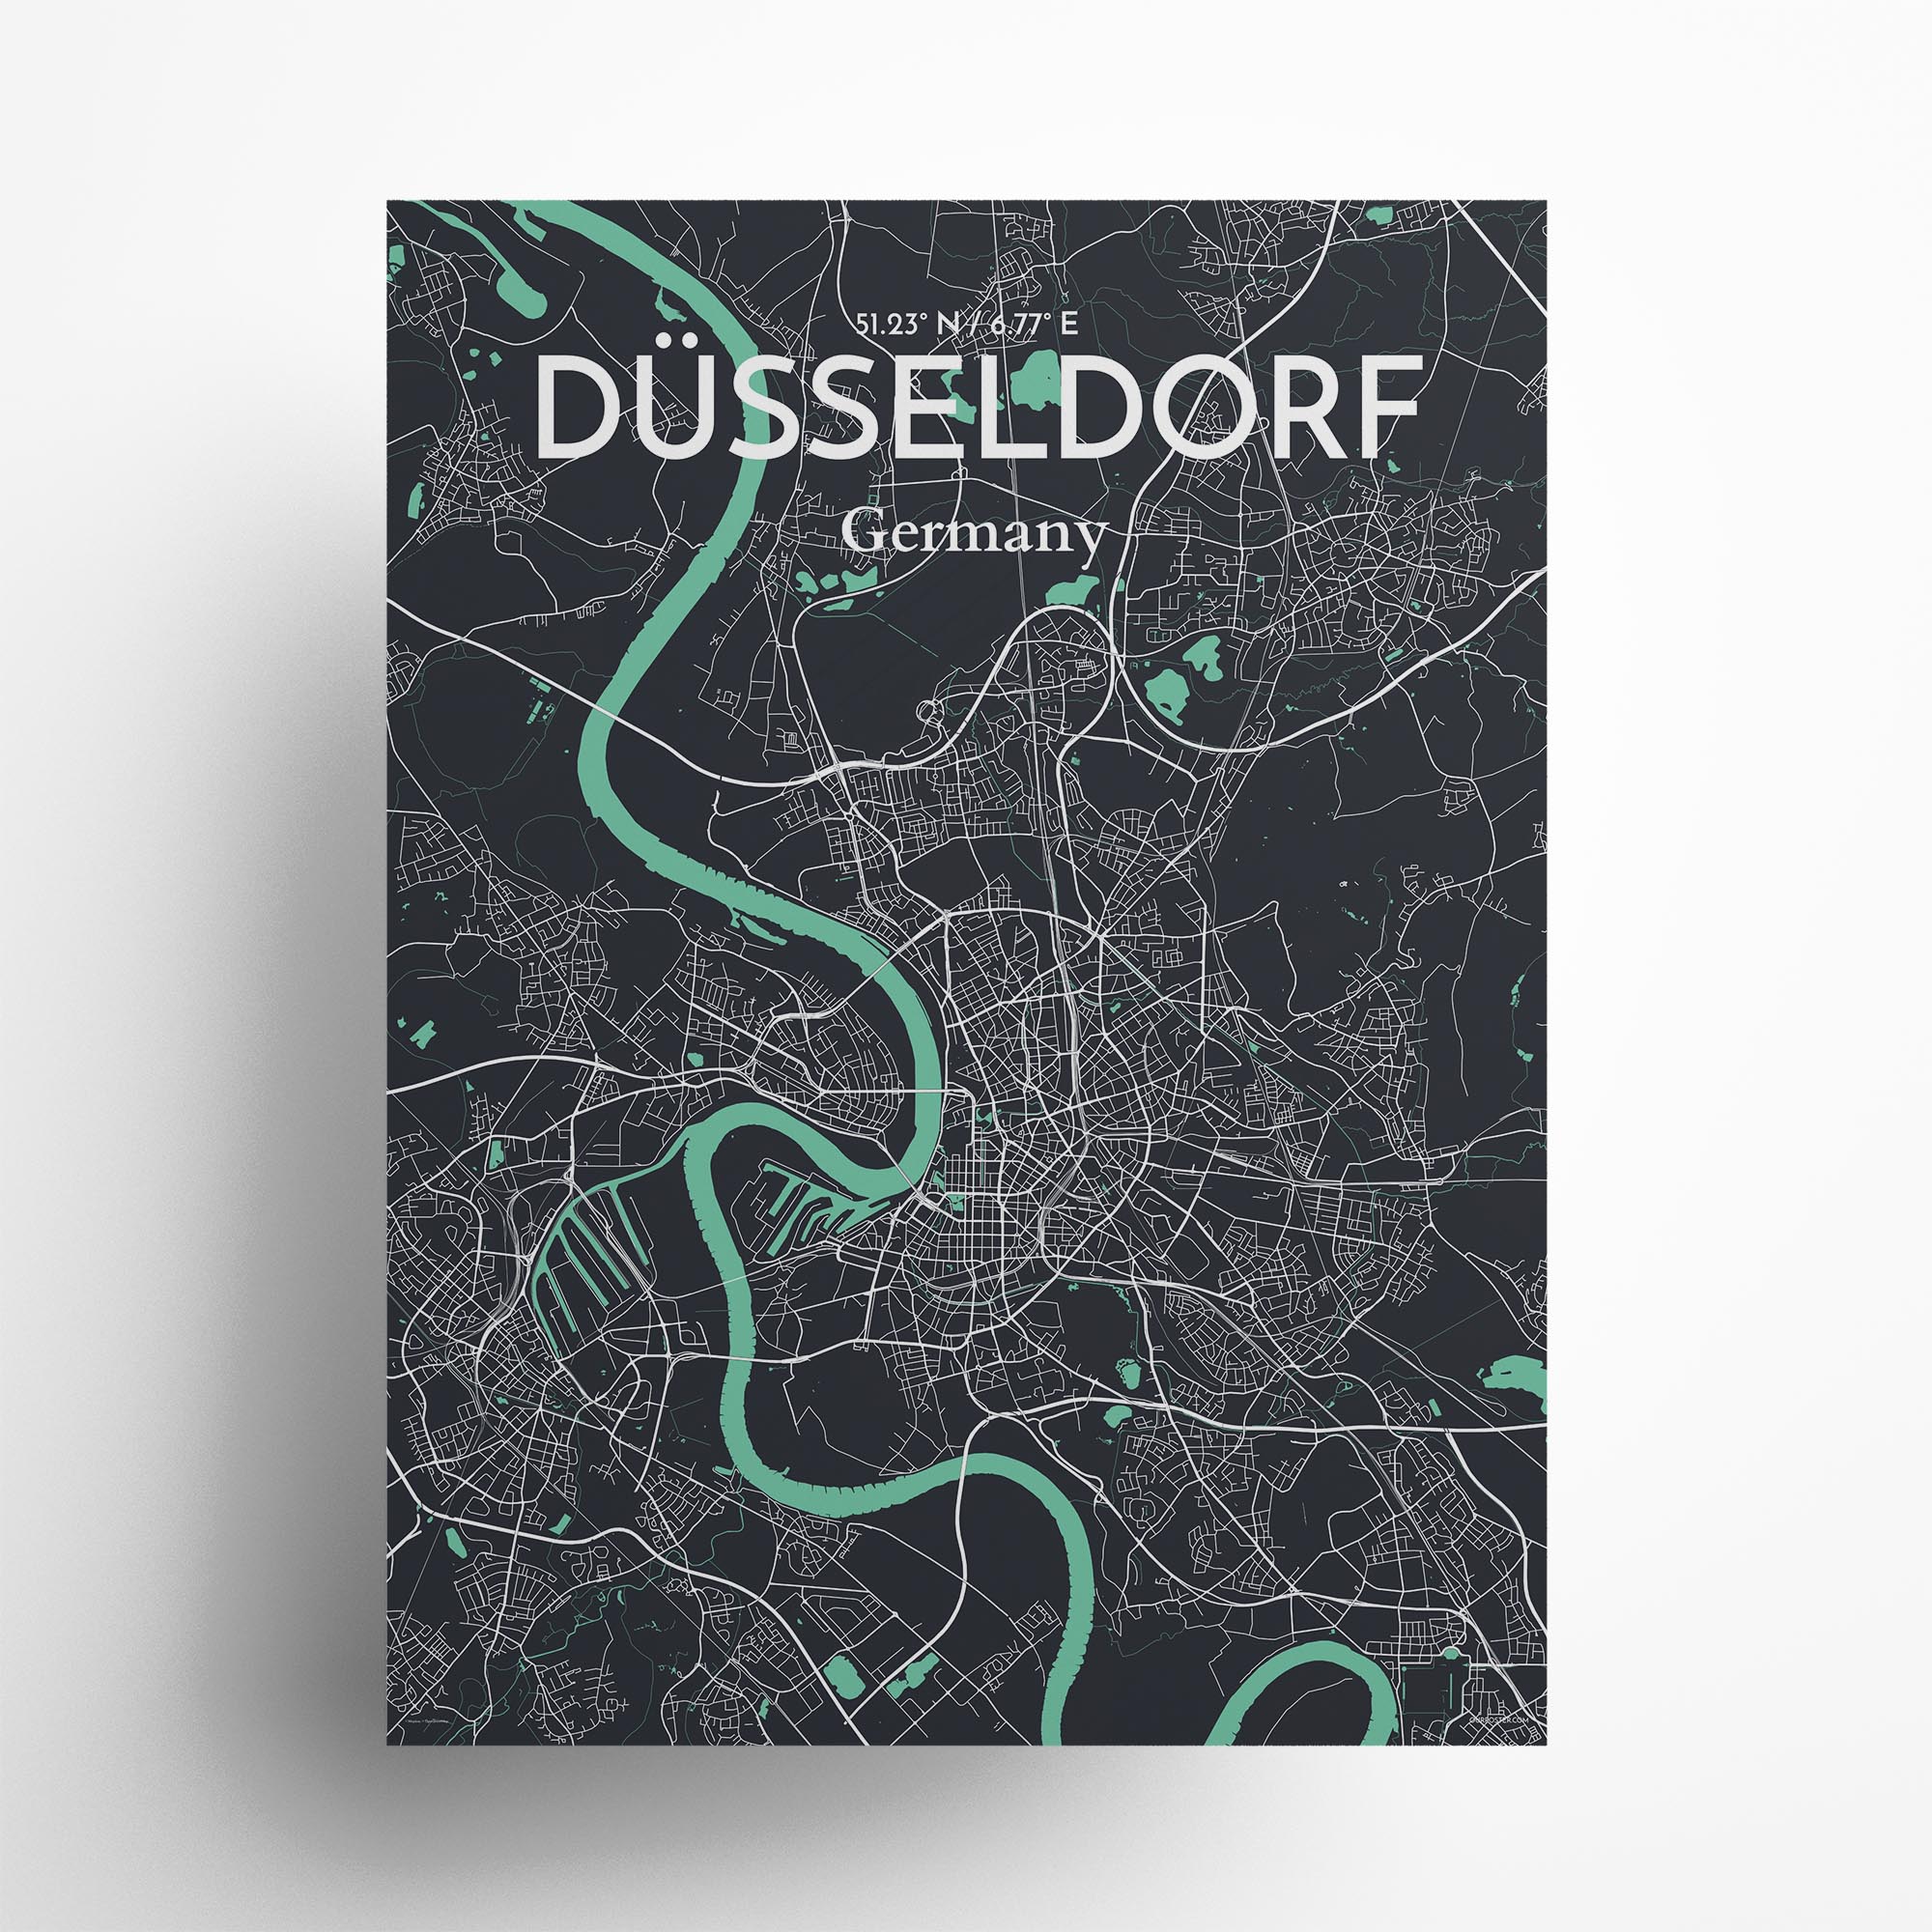 Dusseldorf city map poster in Dream of size 18" x 24"